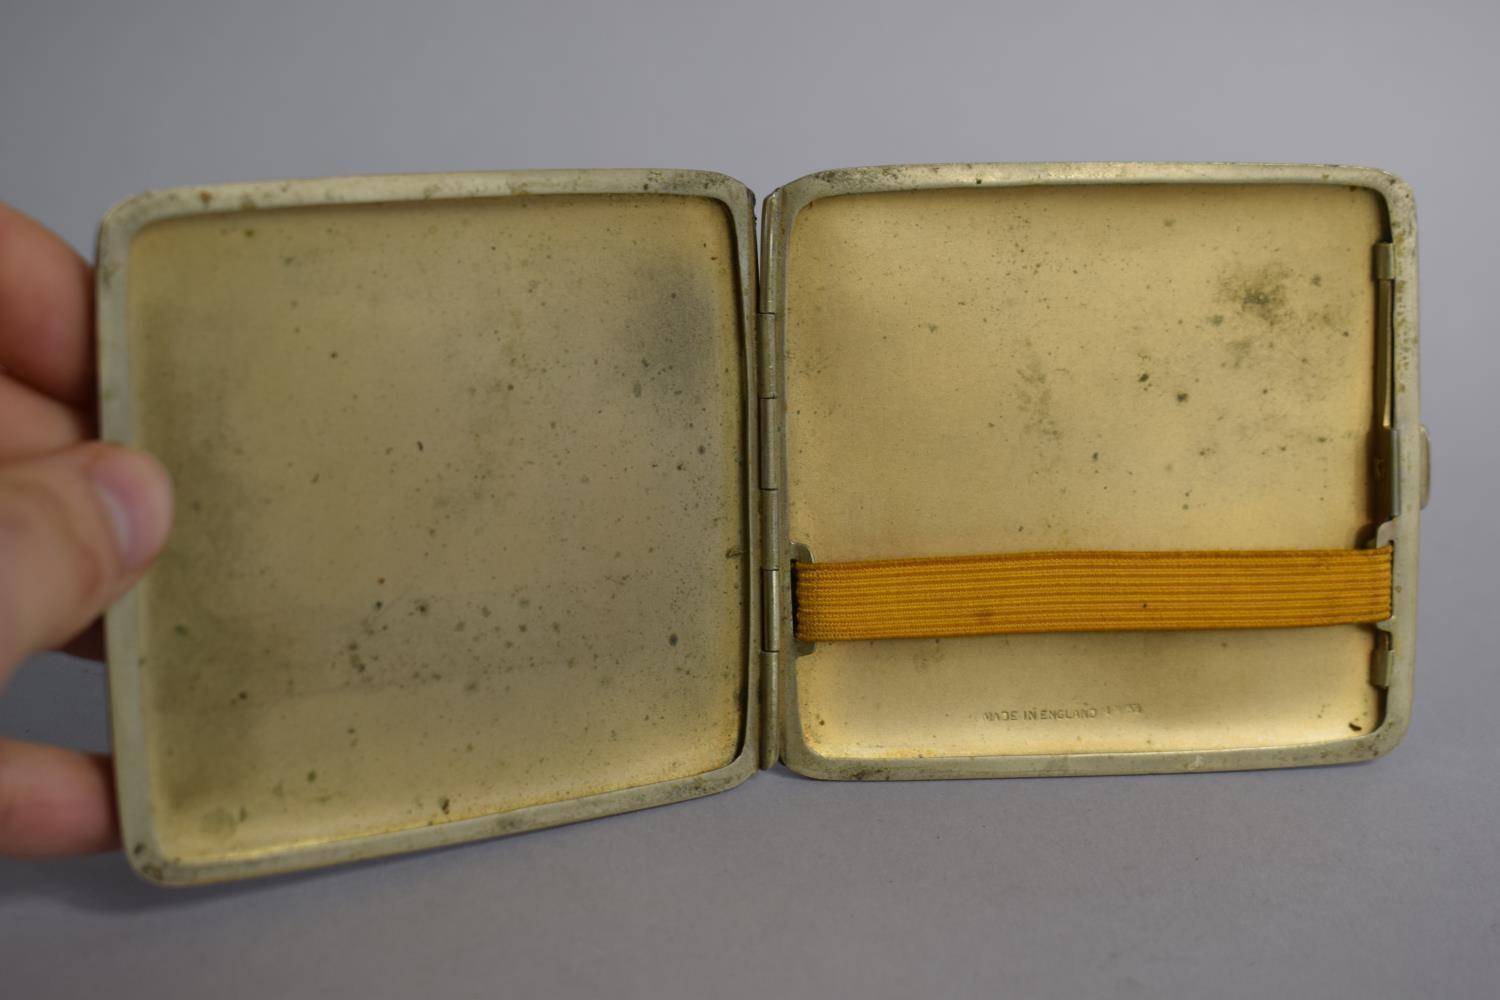 An Edwardian Shagreen Covered Cigarette Case Stamped 'Made in England' - Image 2 of 3